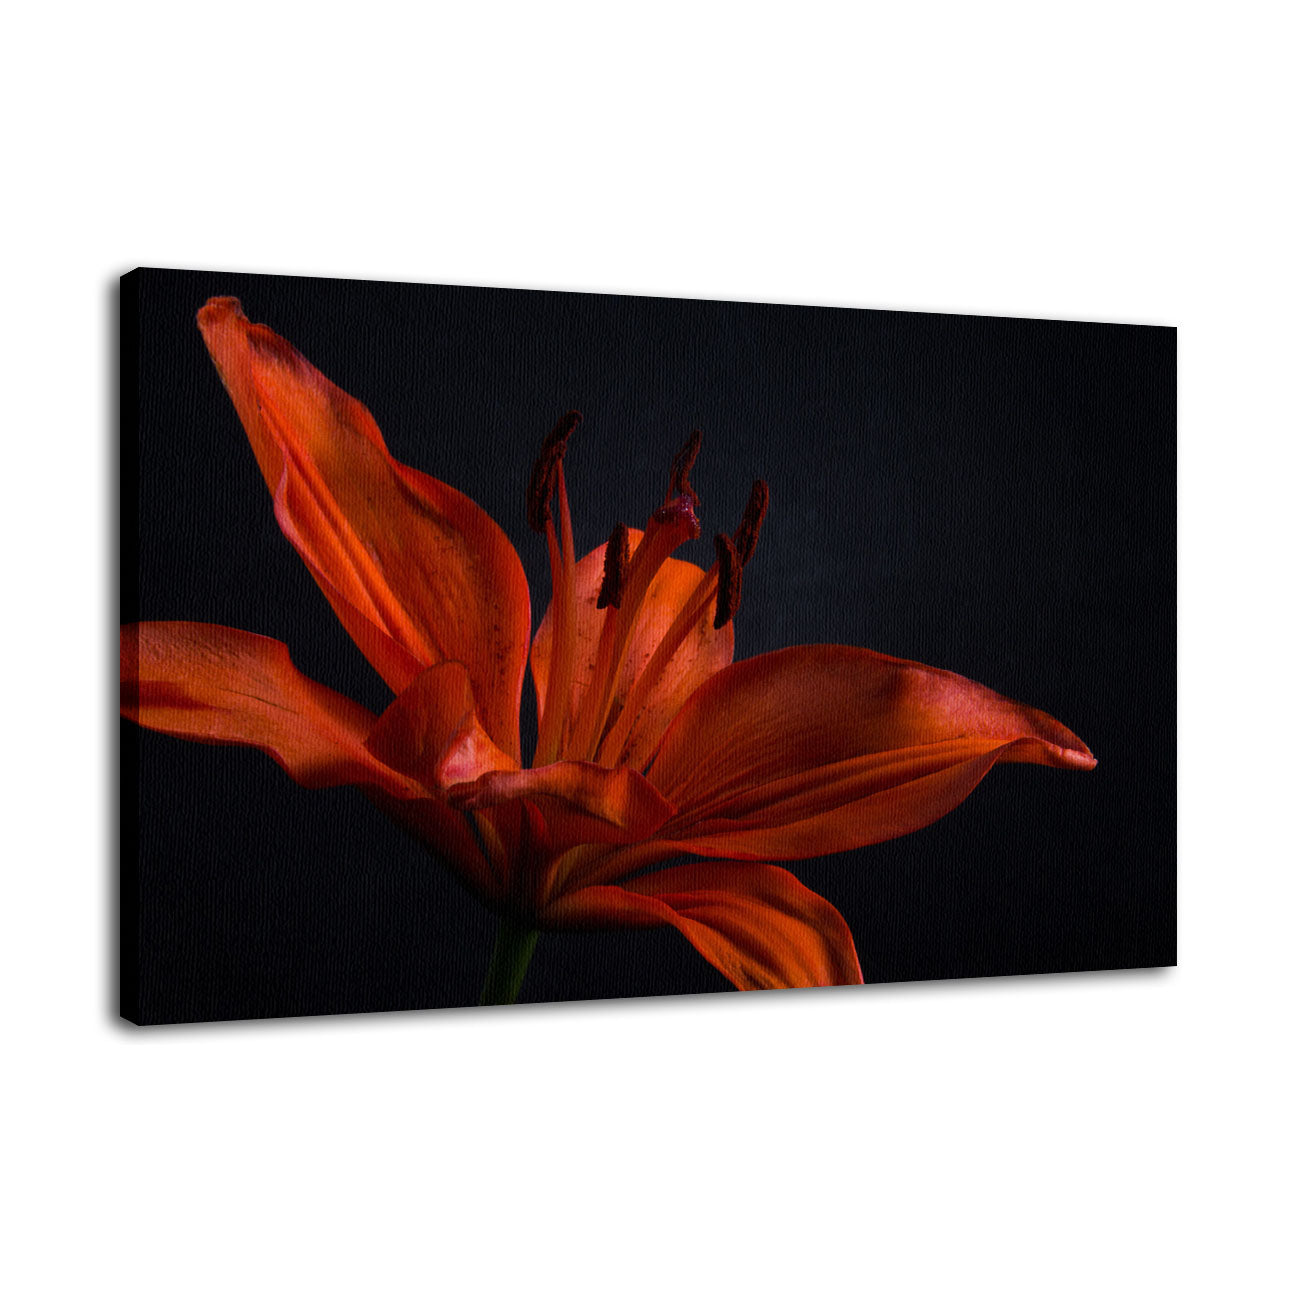 Orange Lily with Backlight Nature / Floral Photo Fine Art Canvas Wall Art Prints  - PIPAFINEART